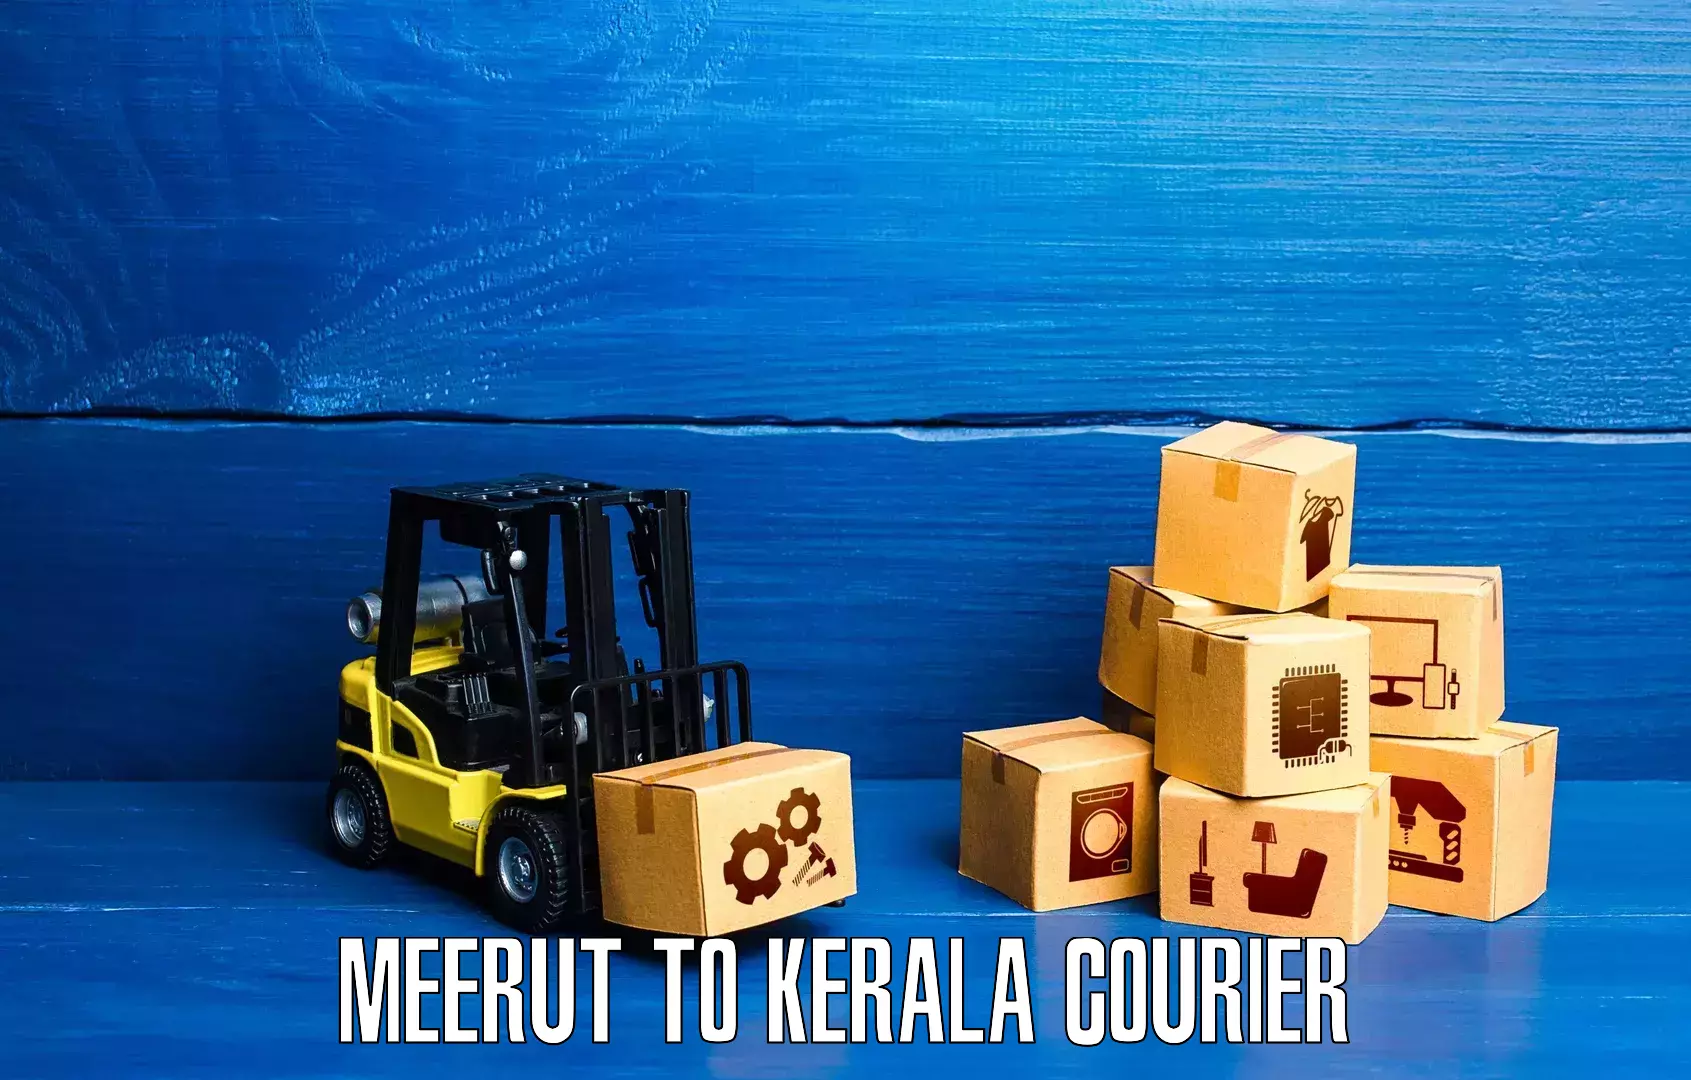 International courier networks Meerut to Calicut